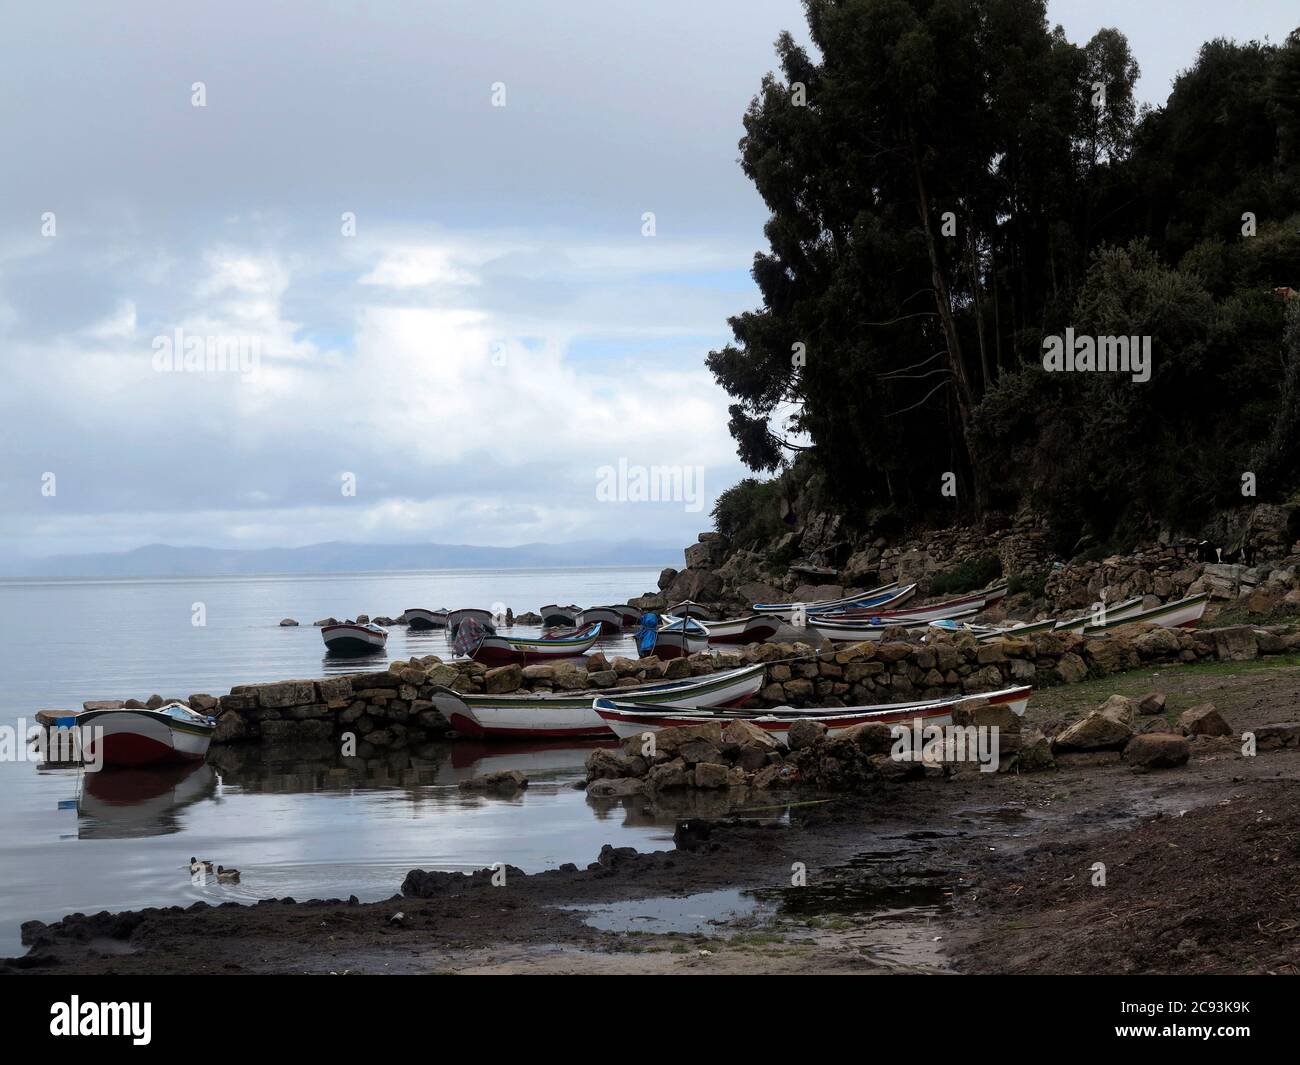 Lake Titicaca, straddling the border between Peru and Bolivia in the Andes Mountains, is one of South America's largest lakes and the world’s highest Stock Photo